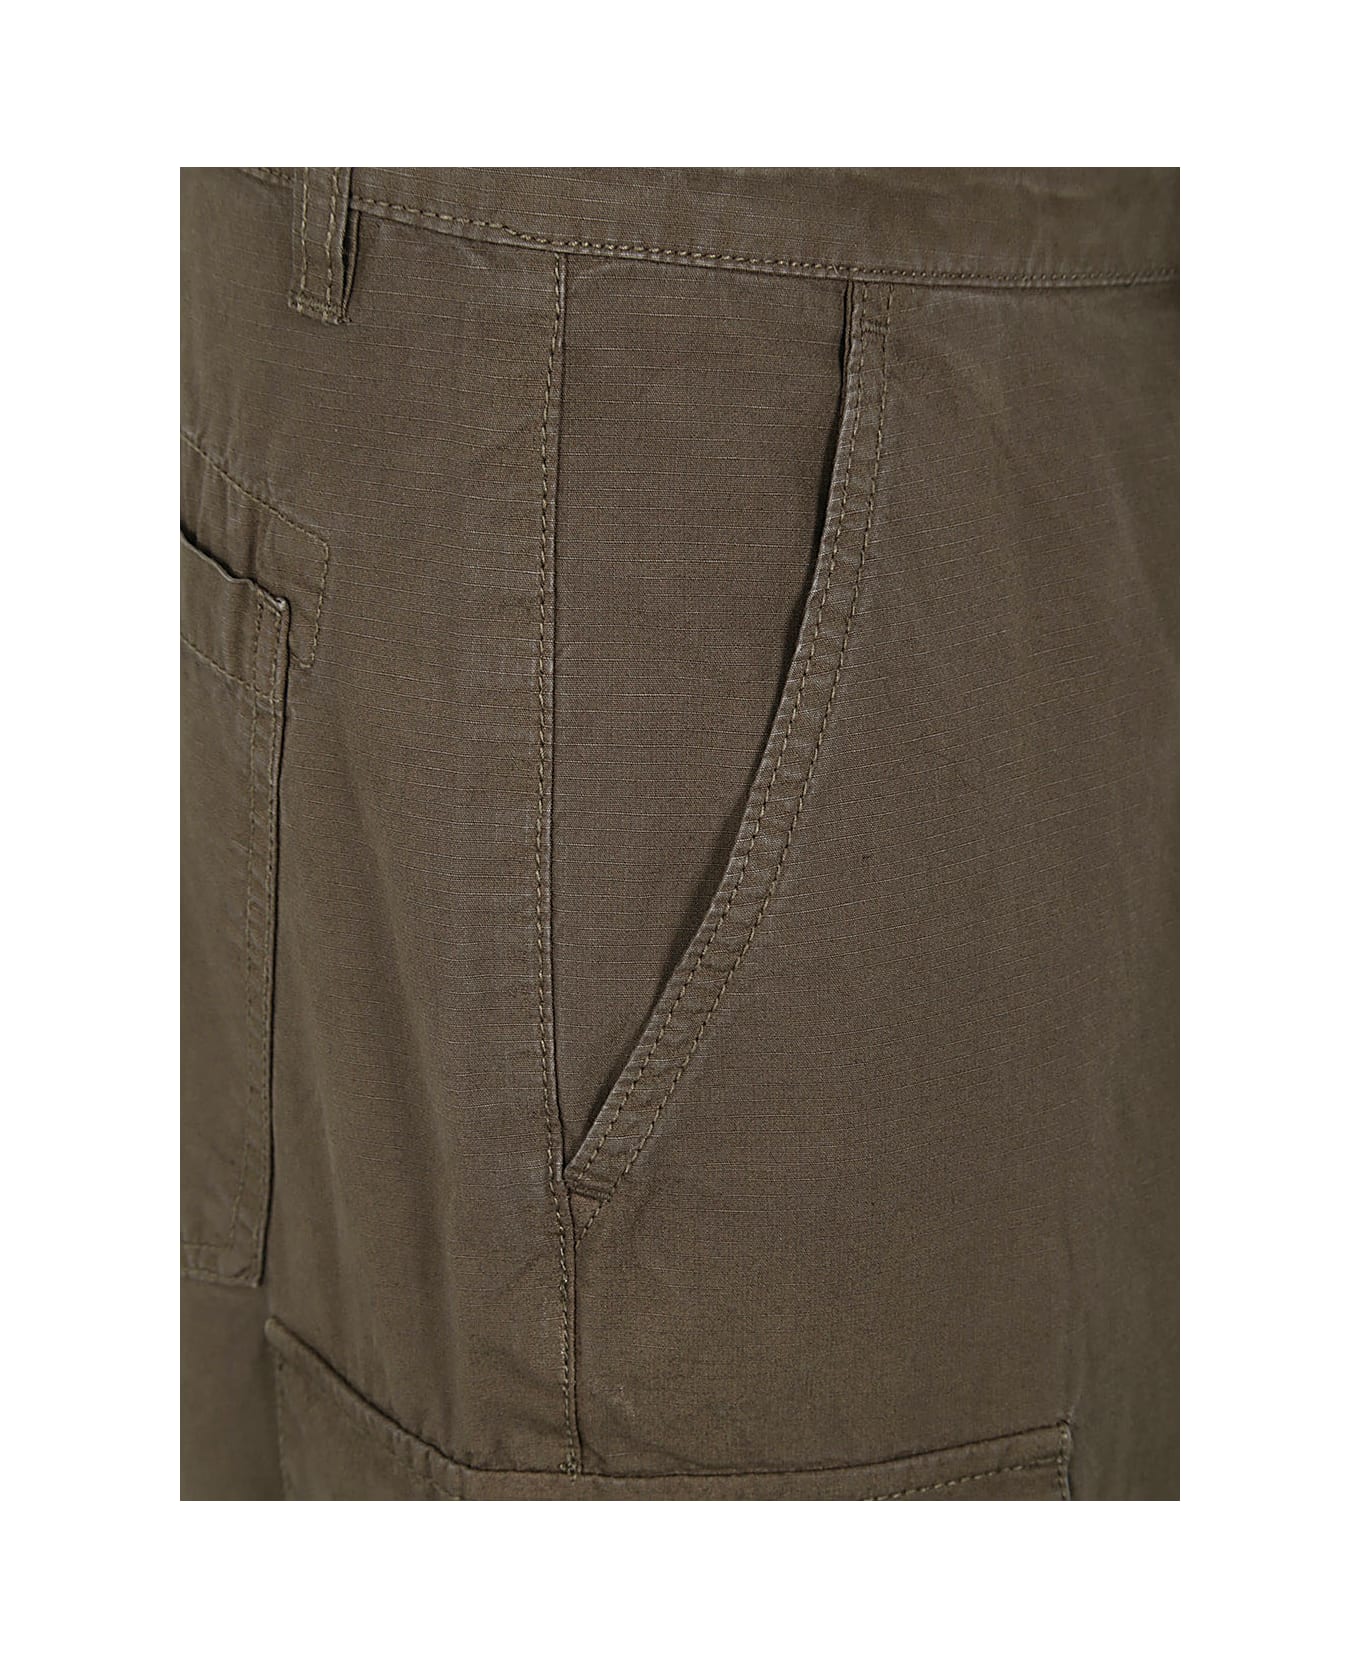 Barbour Essential Ripstop Cargo Trousers - Tarmac